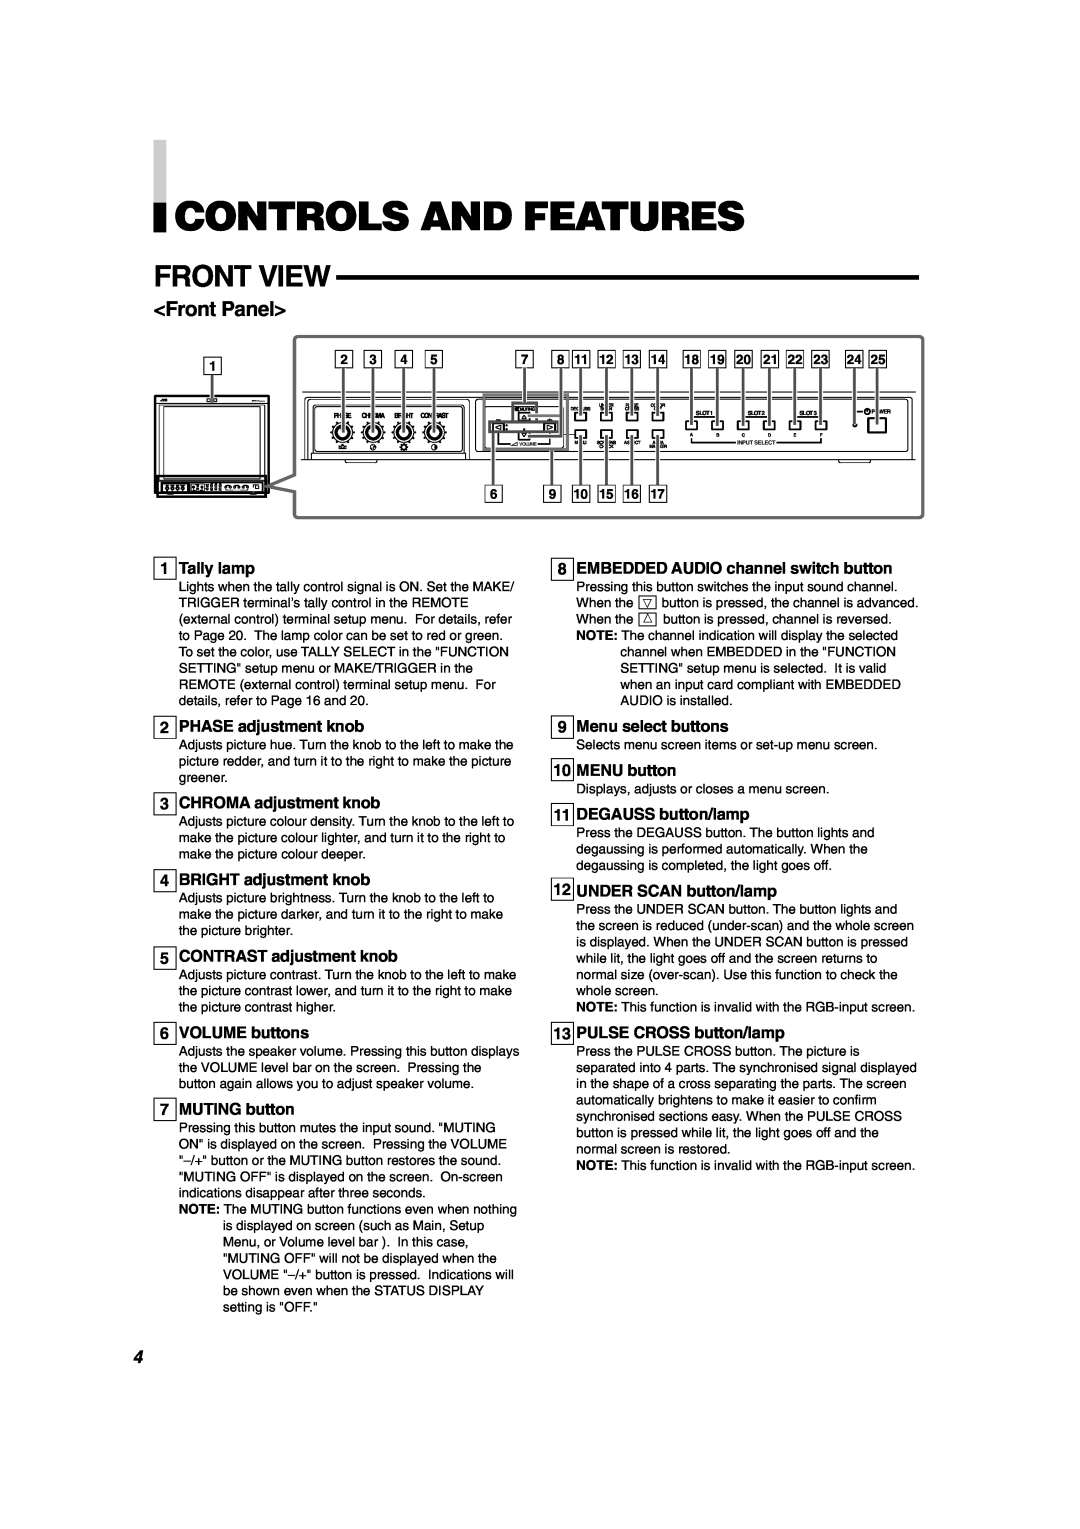 JVC DT-V1900CG manual Controls And Features, Front View 